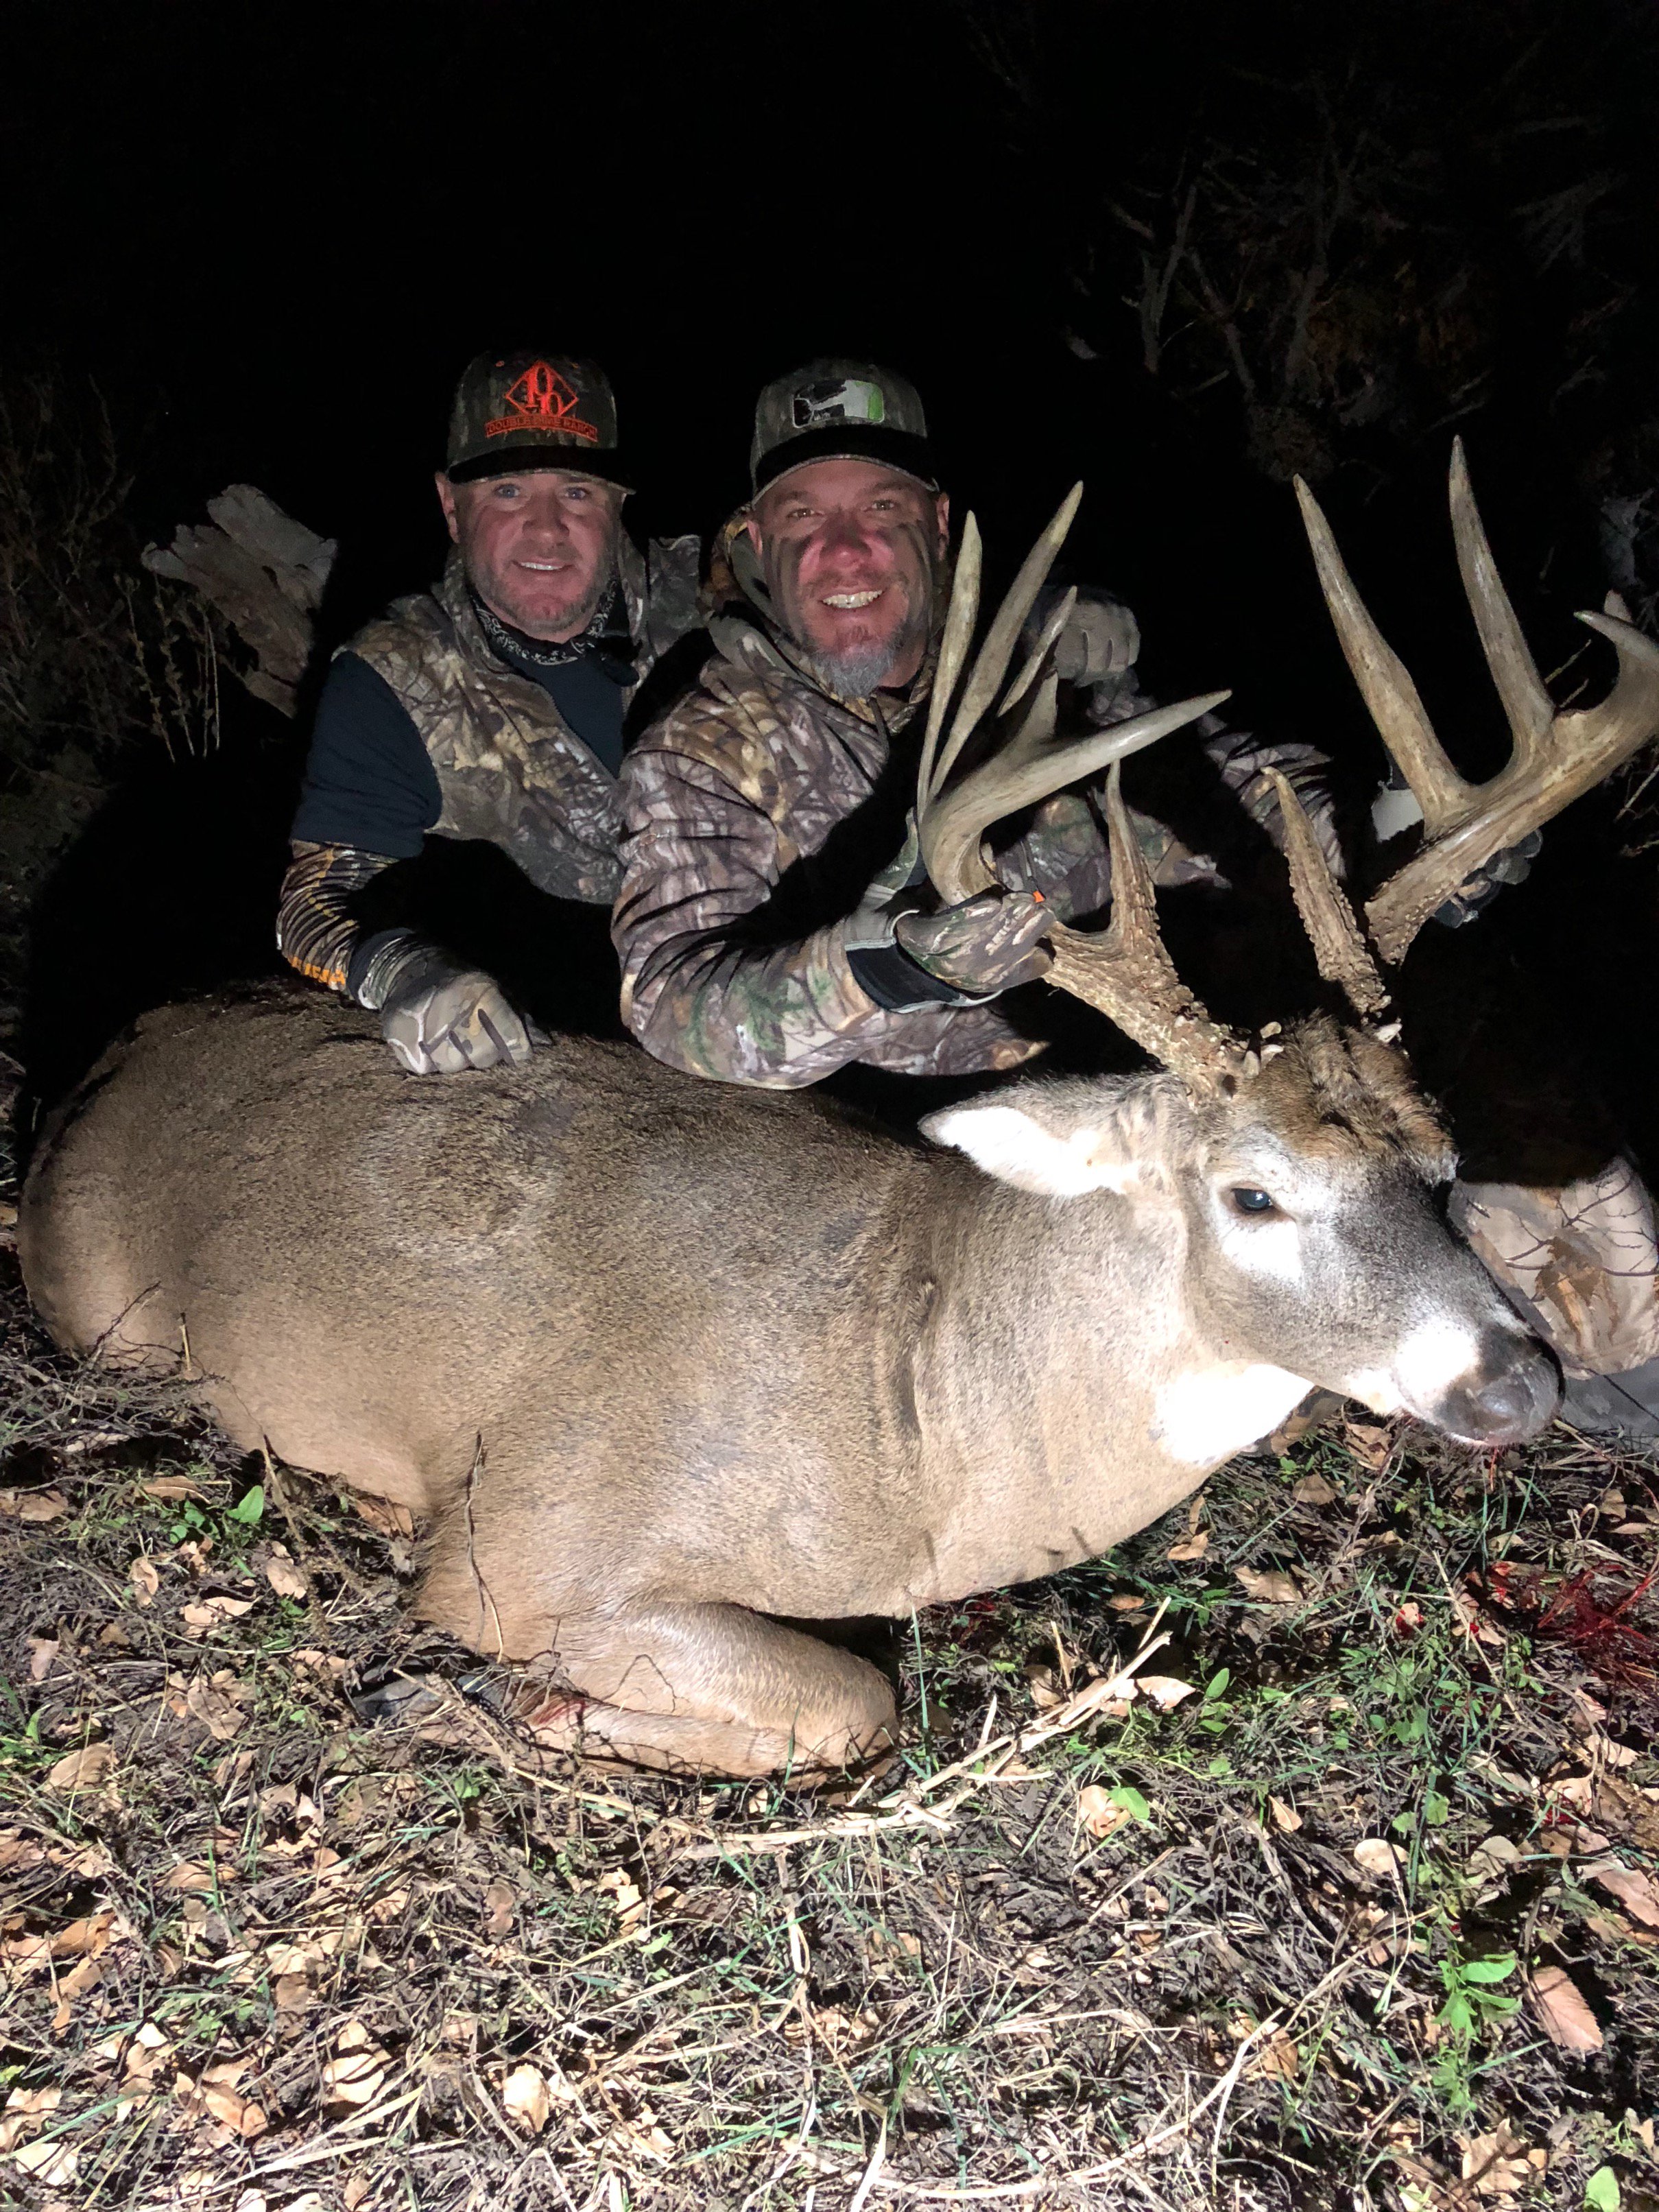 Chipper Jones on X: Took 55 hunts over 2 seasons but ole Sleven is finally  on the ground! Shout out to @mlbhunter @ScentLokTech @bloodsportgear  @bdanker @realtree and #triplecreekblinds. Great hunt boys!   /